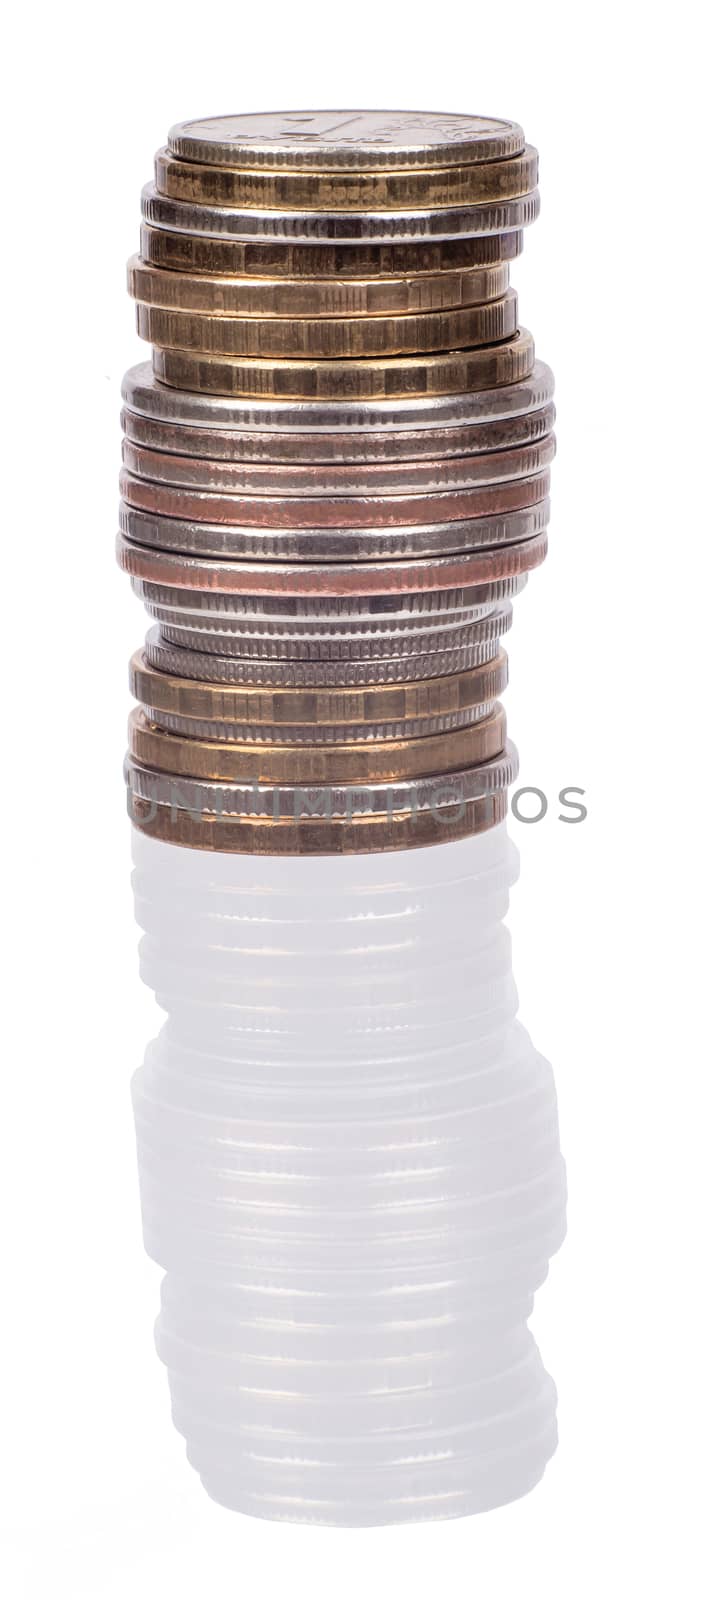 Stack of coins on isolated white background